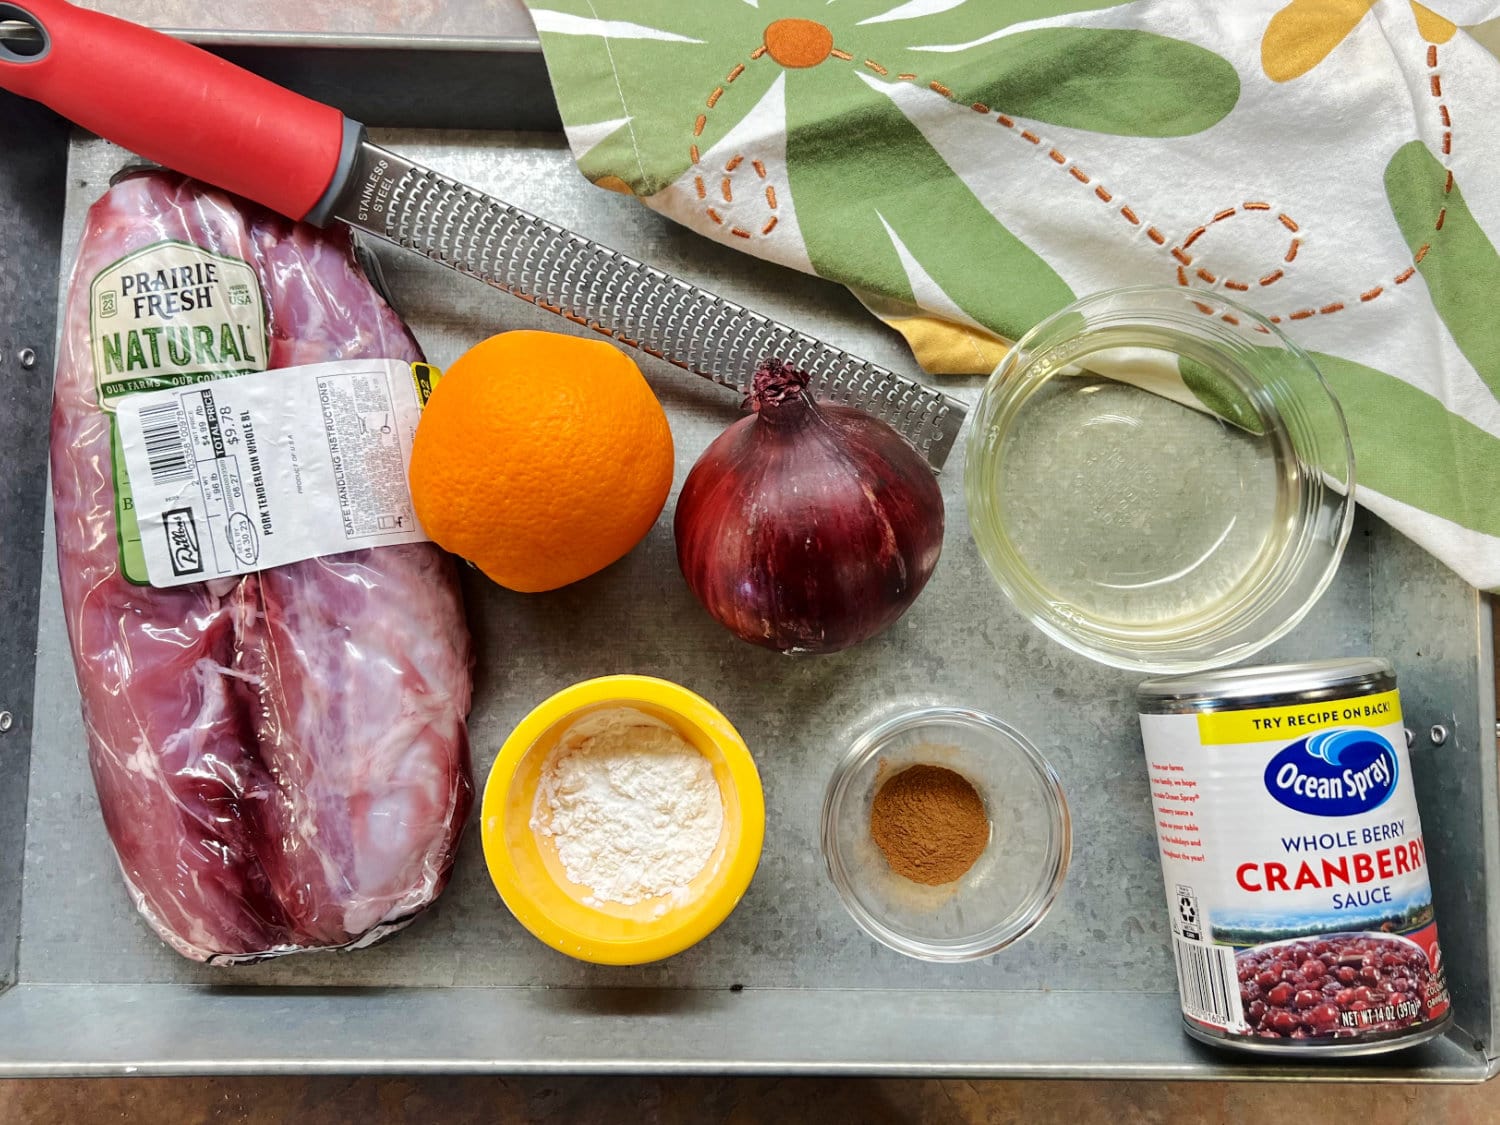 All the ingredients needed to make Cranberry Pork Tenderloin.